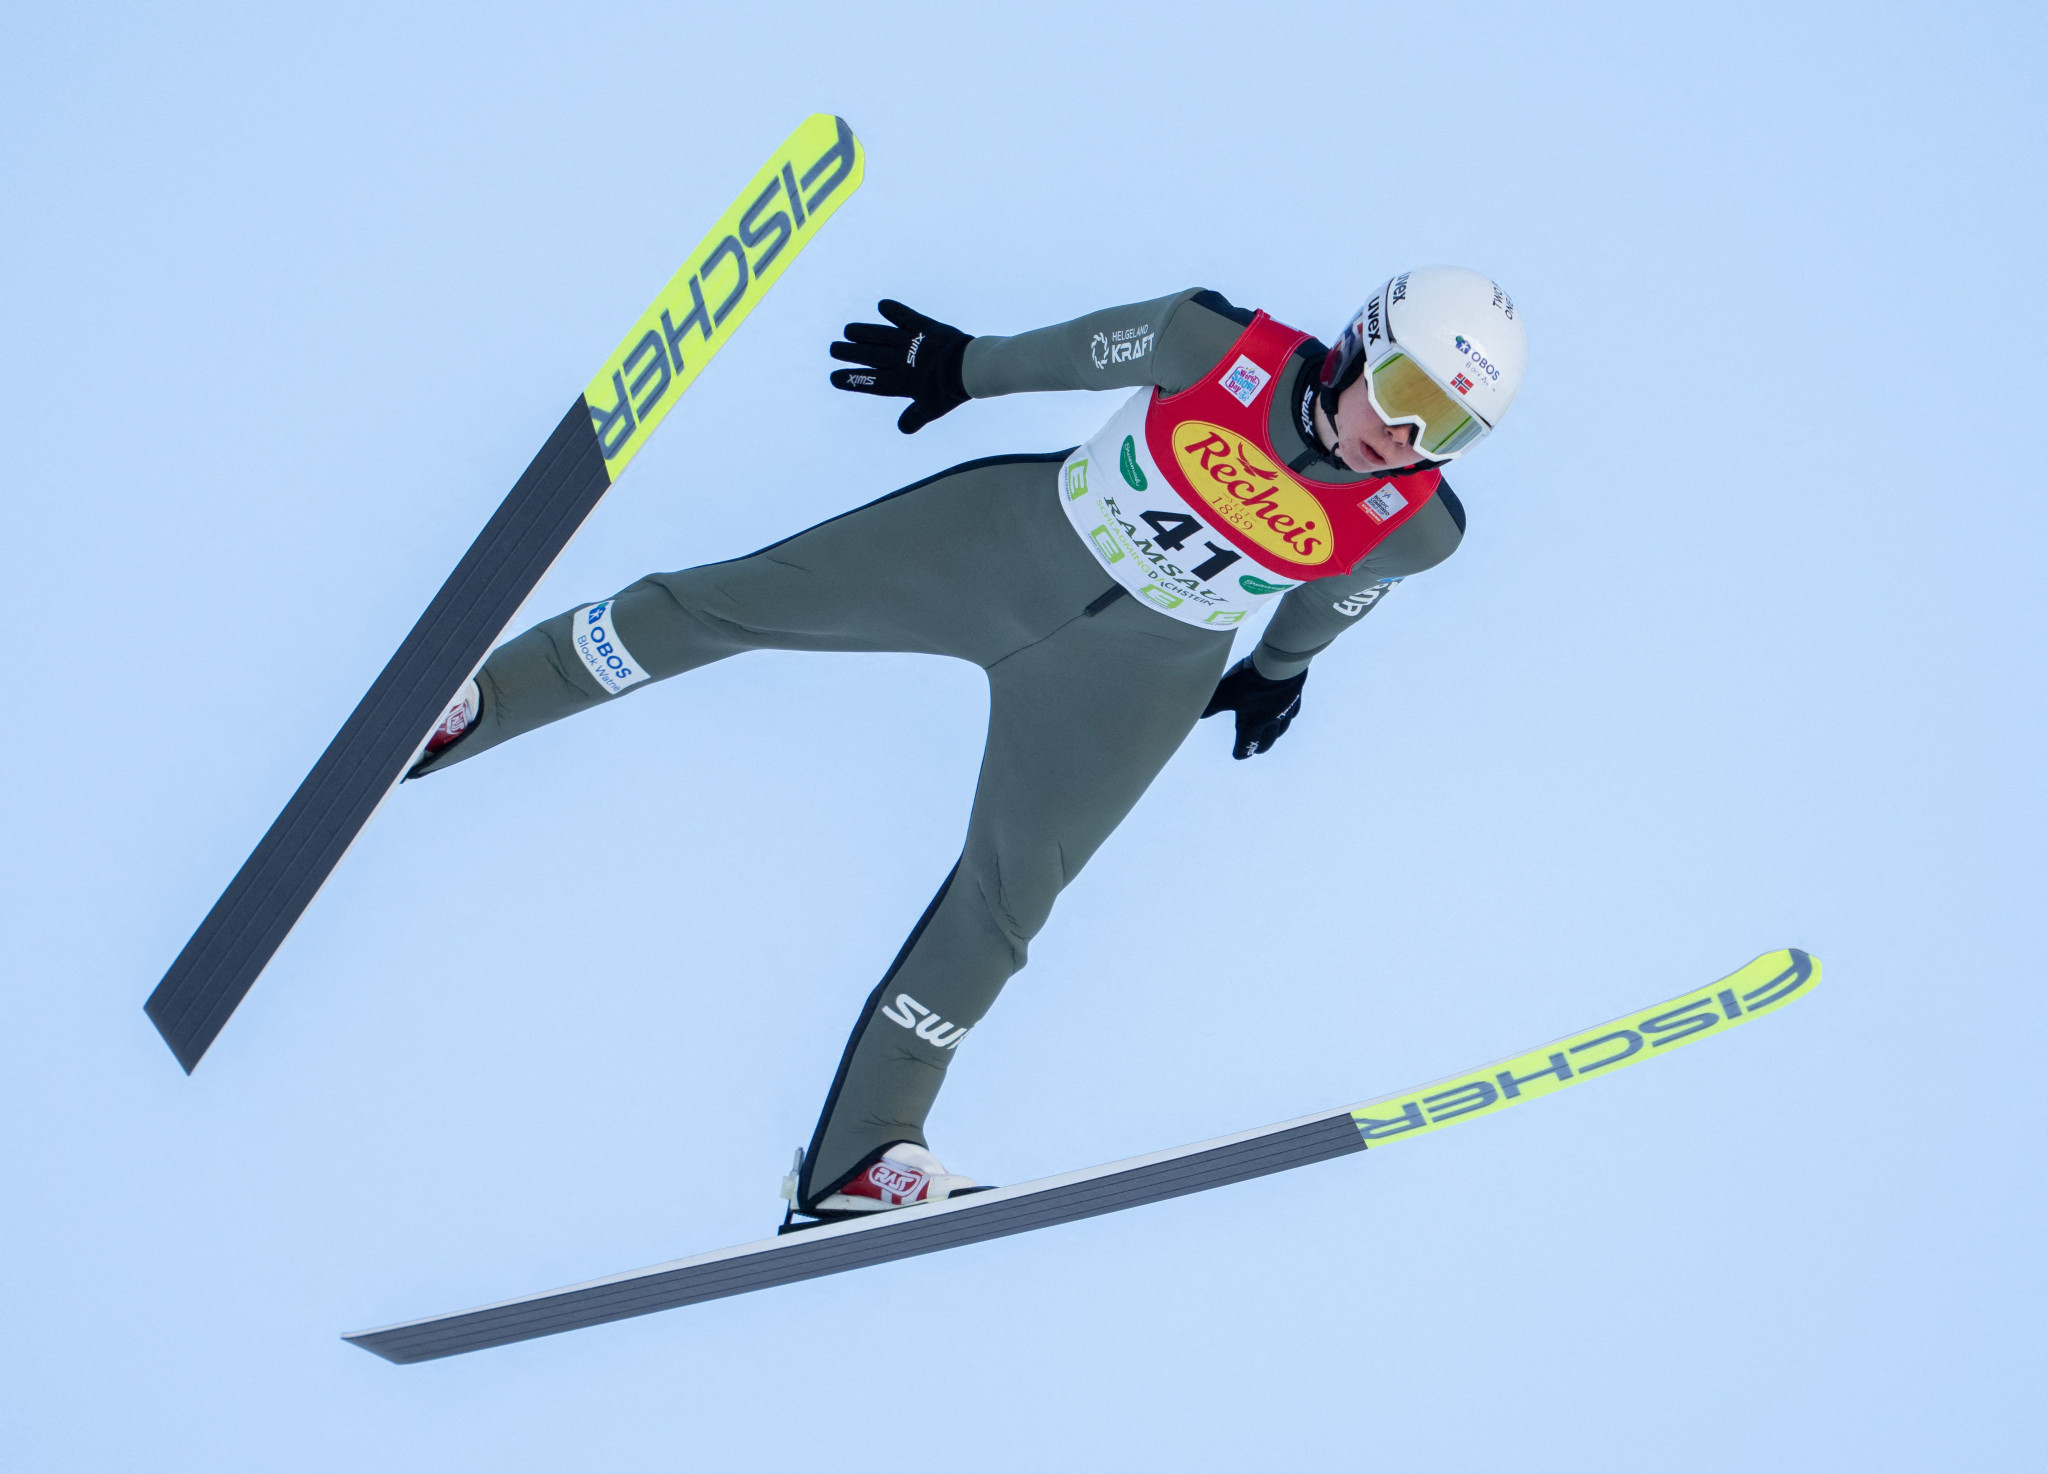 Jens Luraas Oftebro's jump of 101 metres helped Norway to win gold in the FIS Nordic Combined mixed team event ©Getty Images